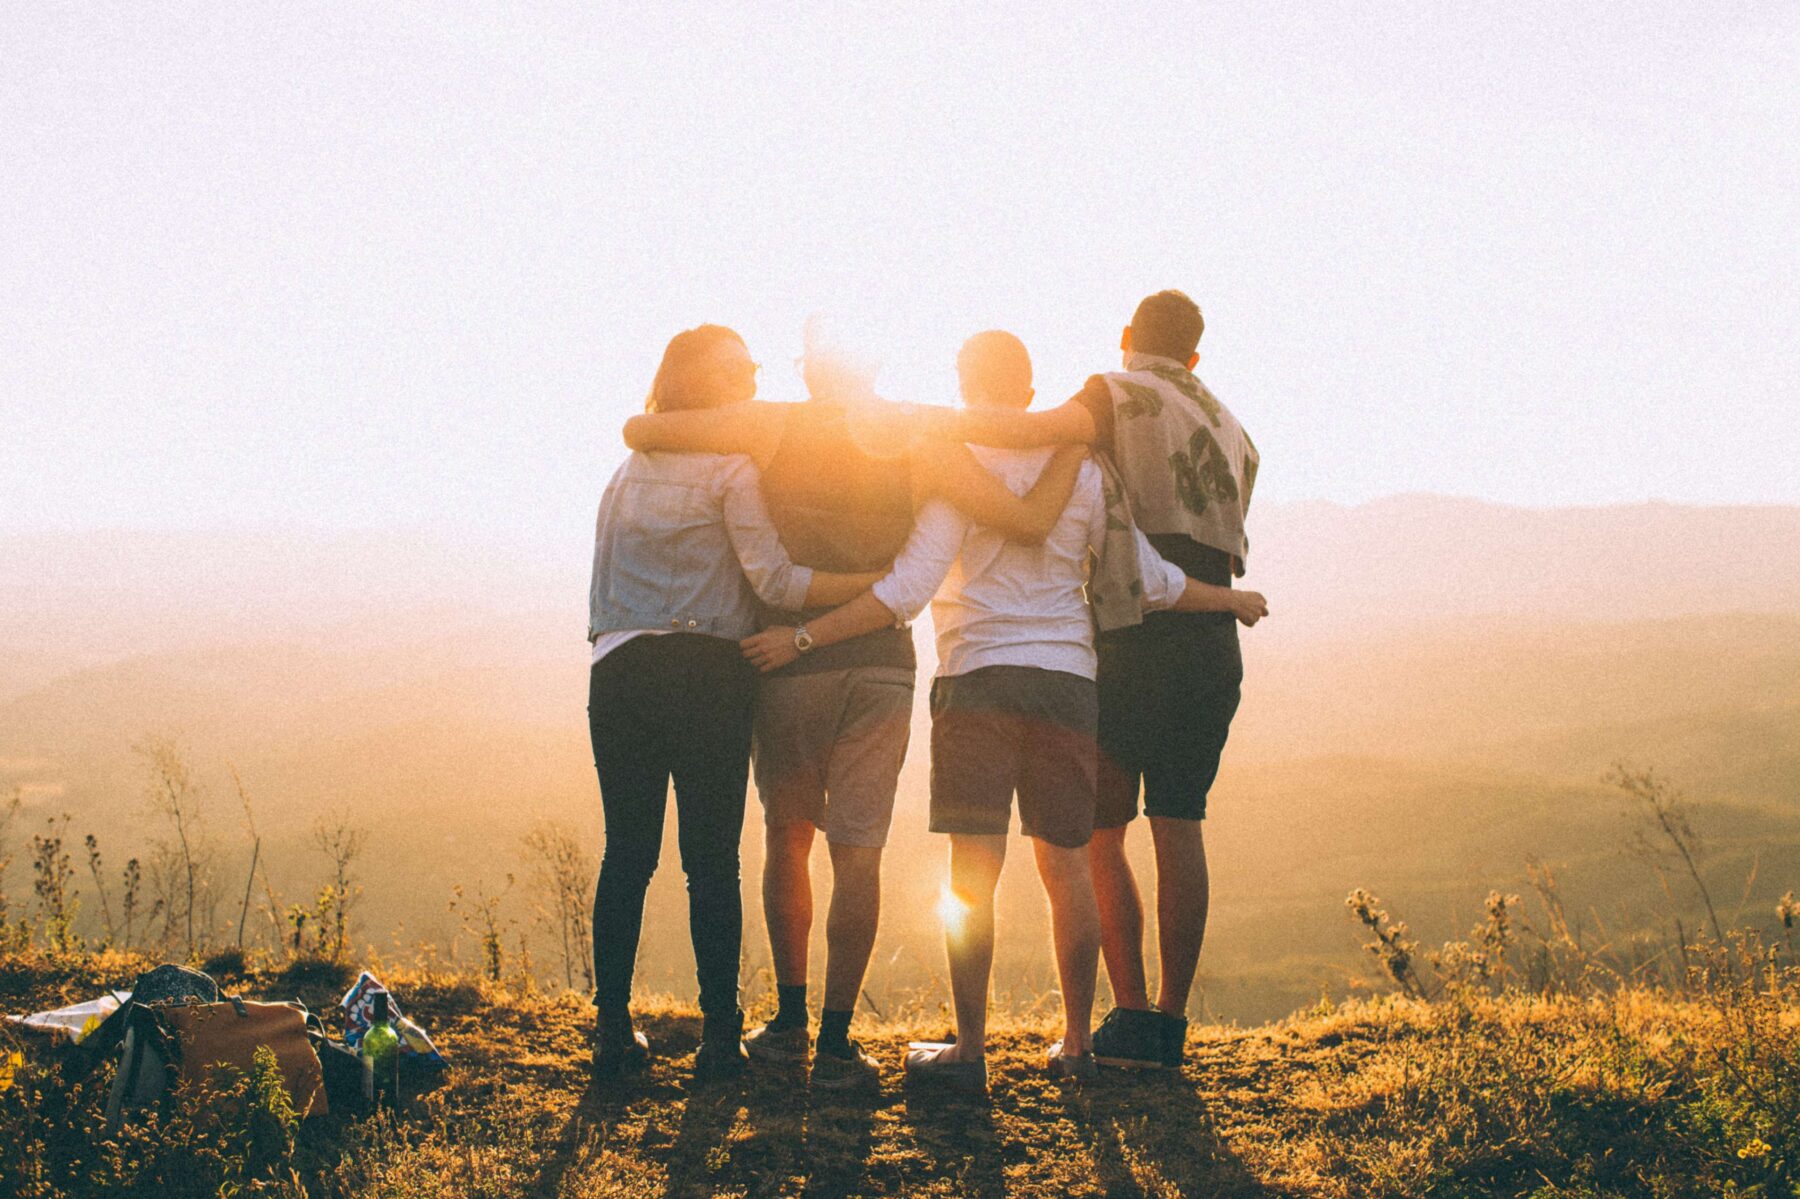 4 friends holding each other watching a sunset